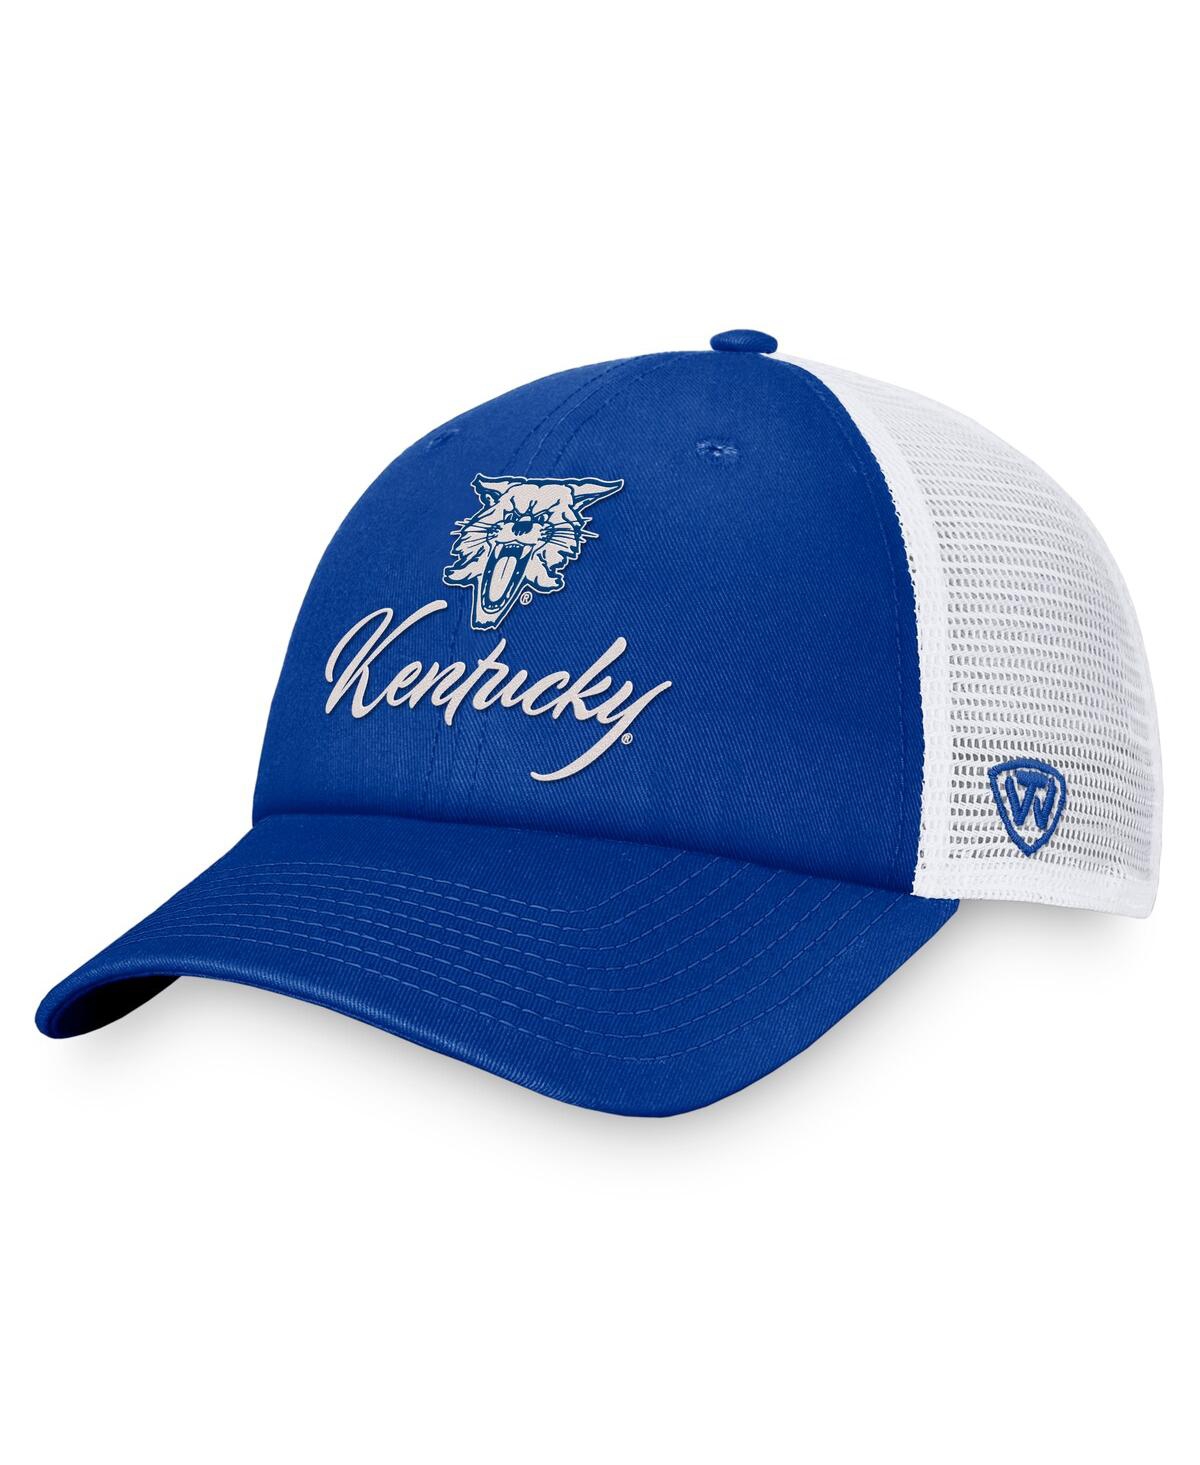 Women's Top of the World Royal, White Kentucky Wildcats Charm Trucker Adjustable Hat - Royal, White